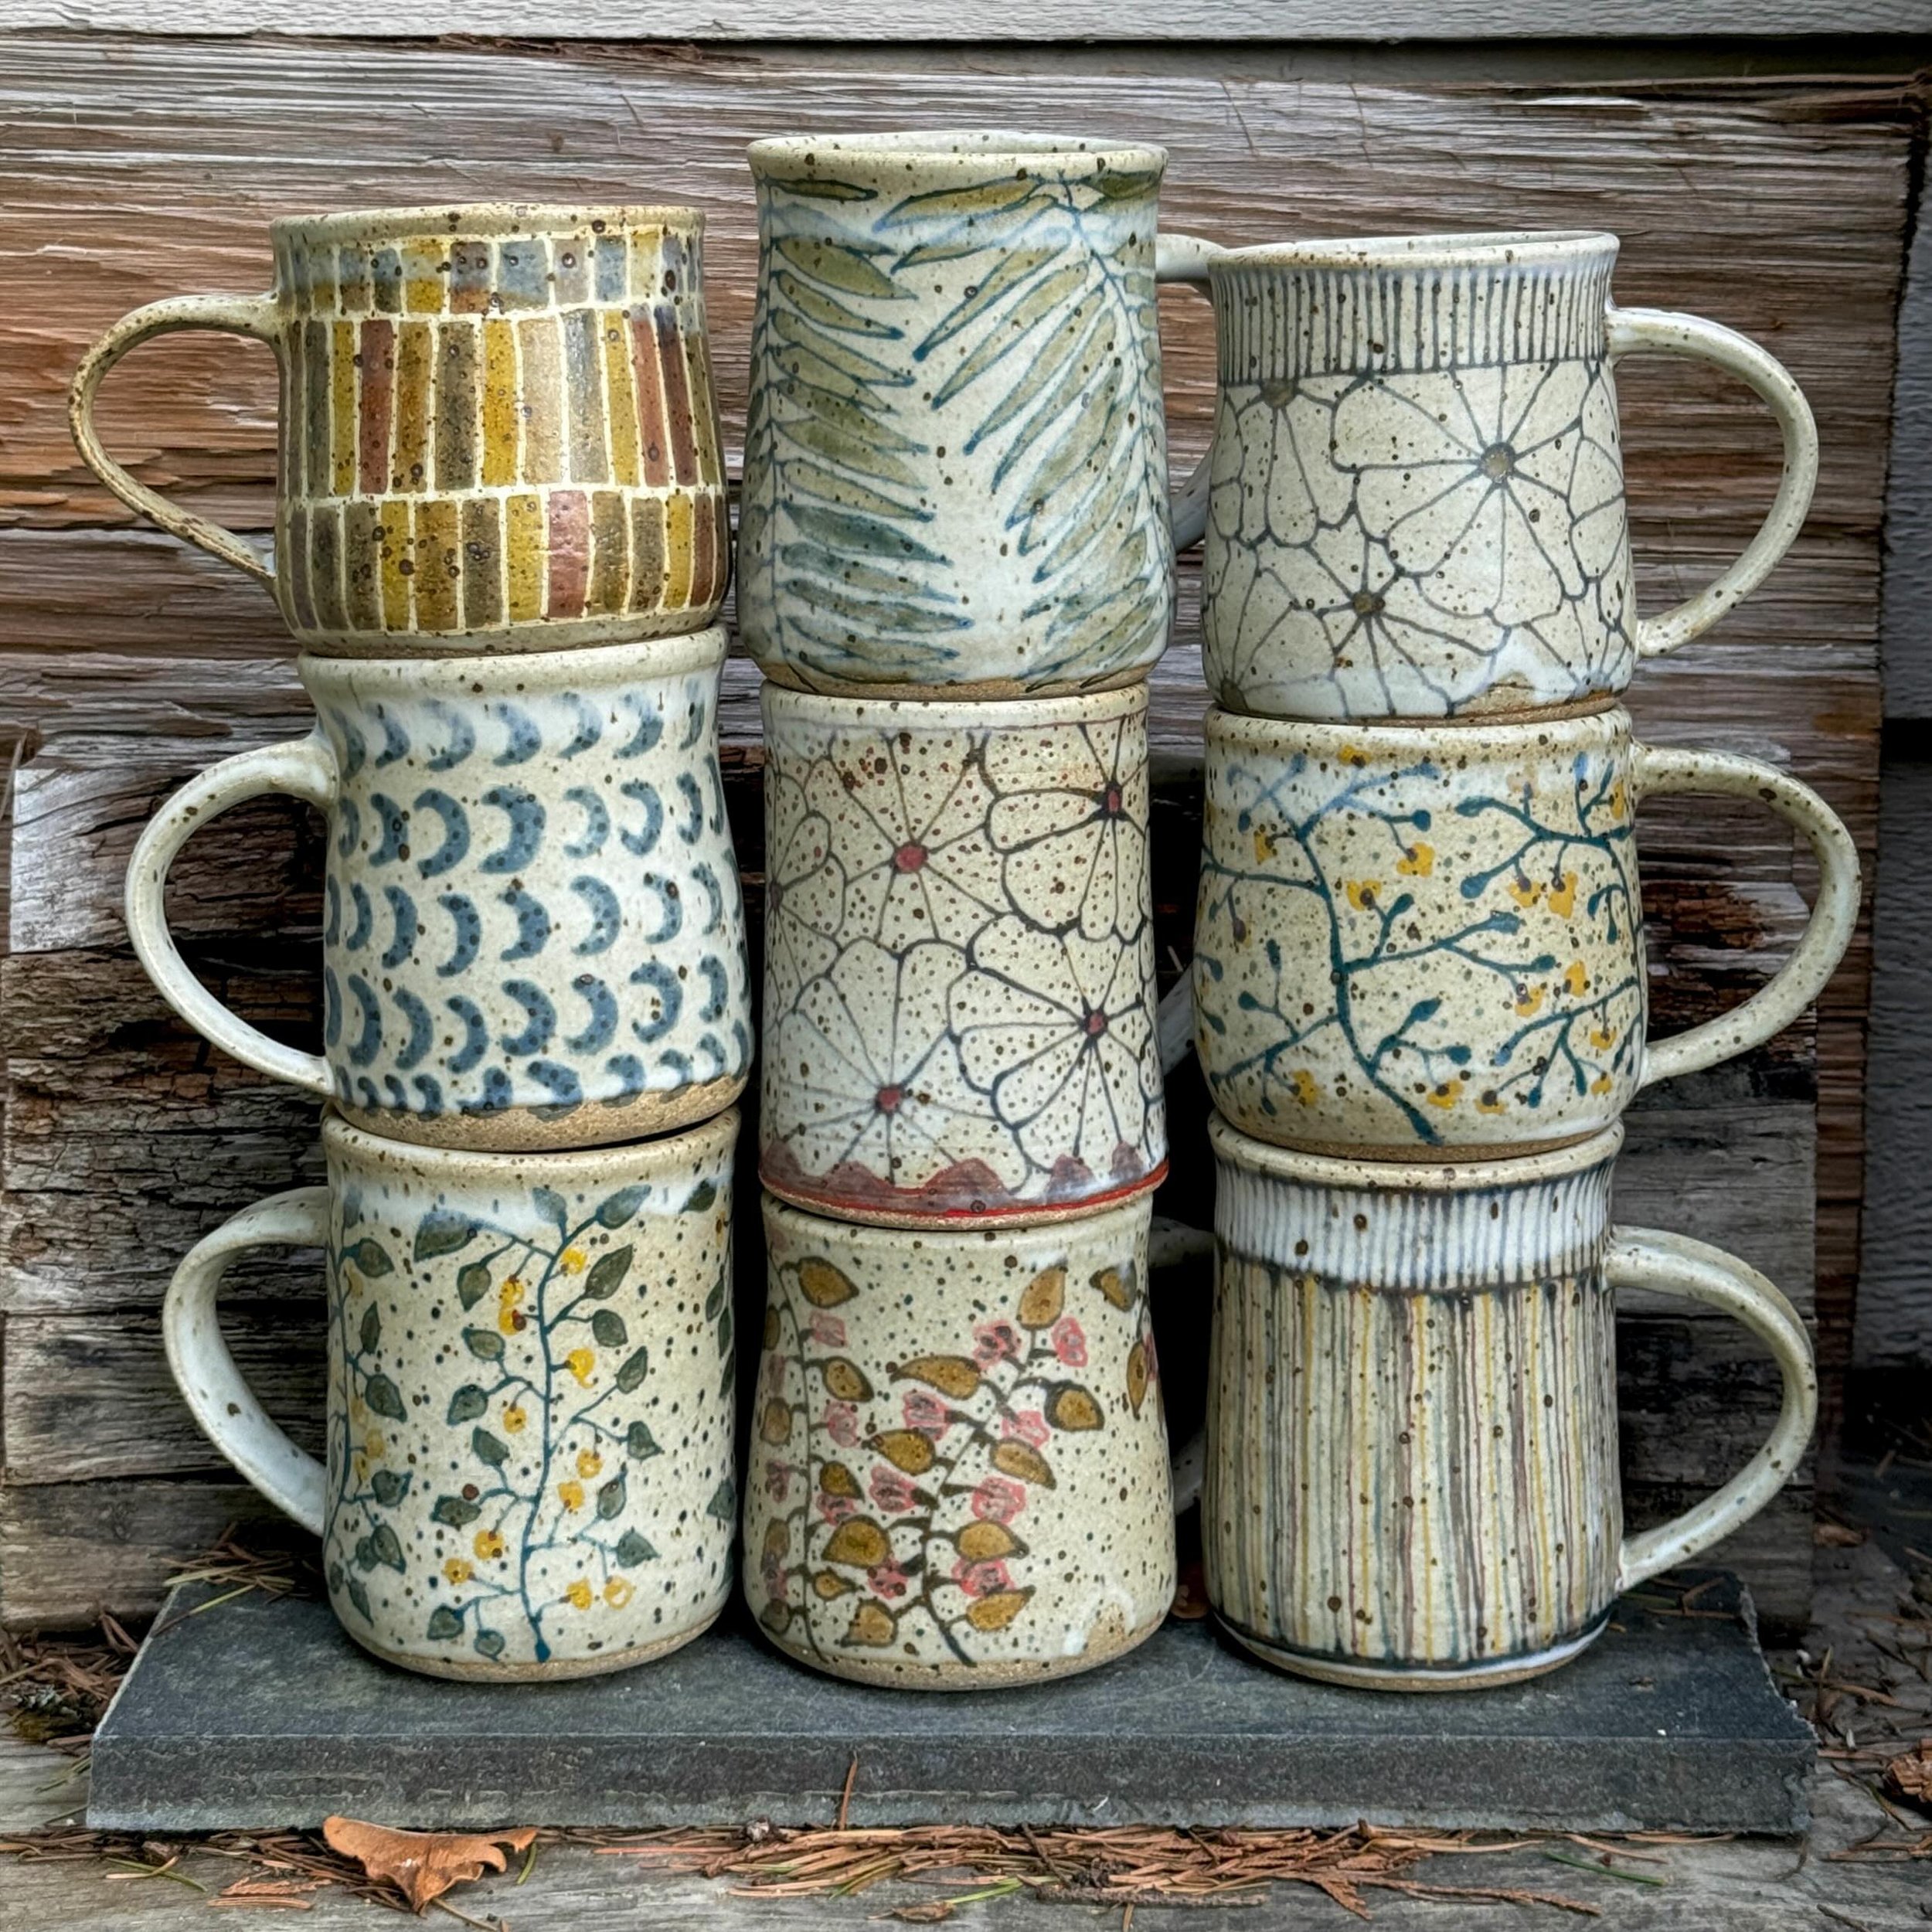 Excited to share new work on Sunday, 4/14 @valleymademarket in Mount Vernon ❤️ #mug #handmade #pottery #pnwpottery